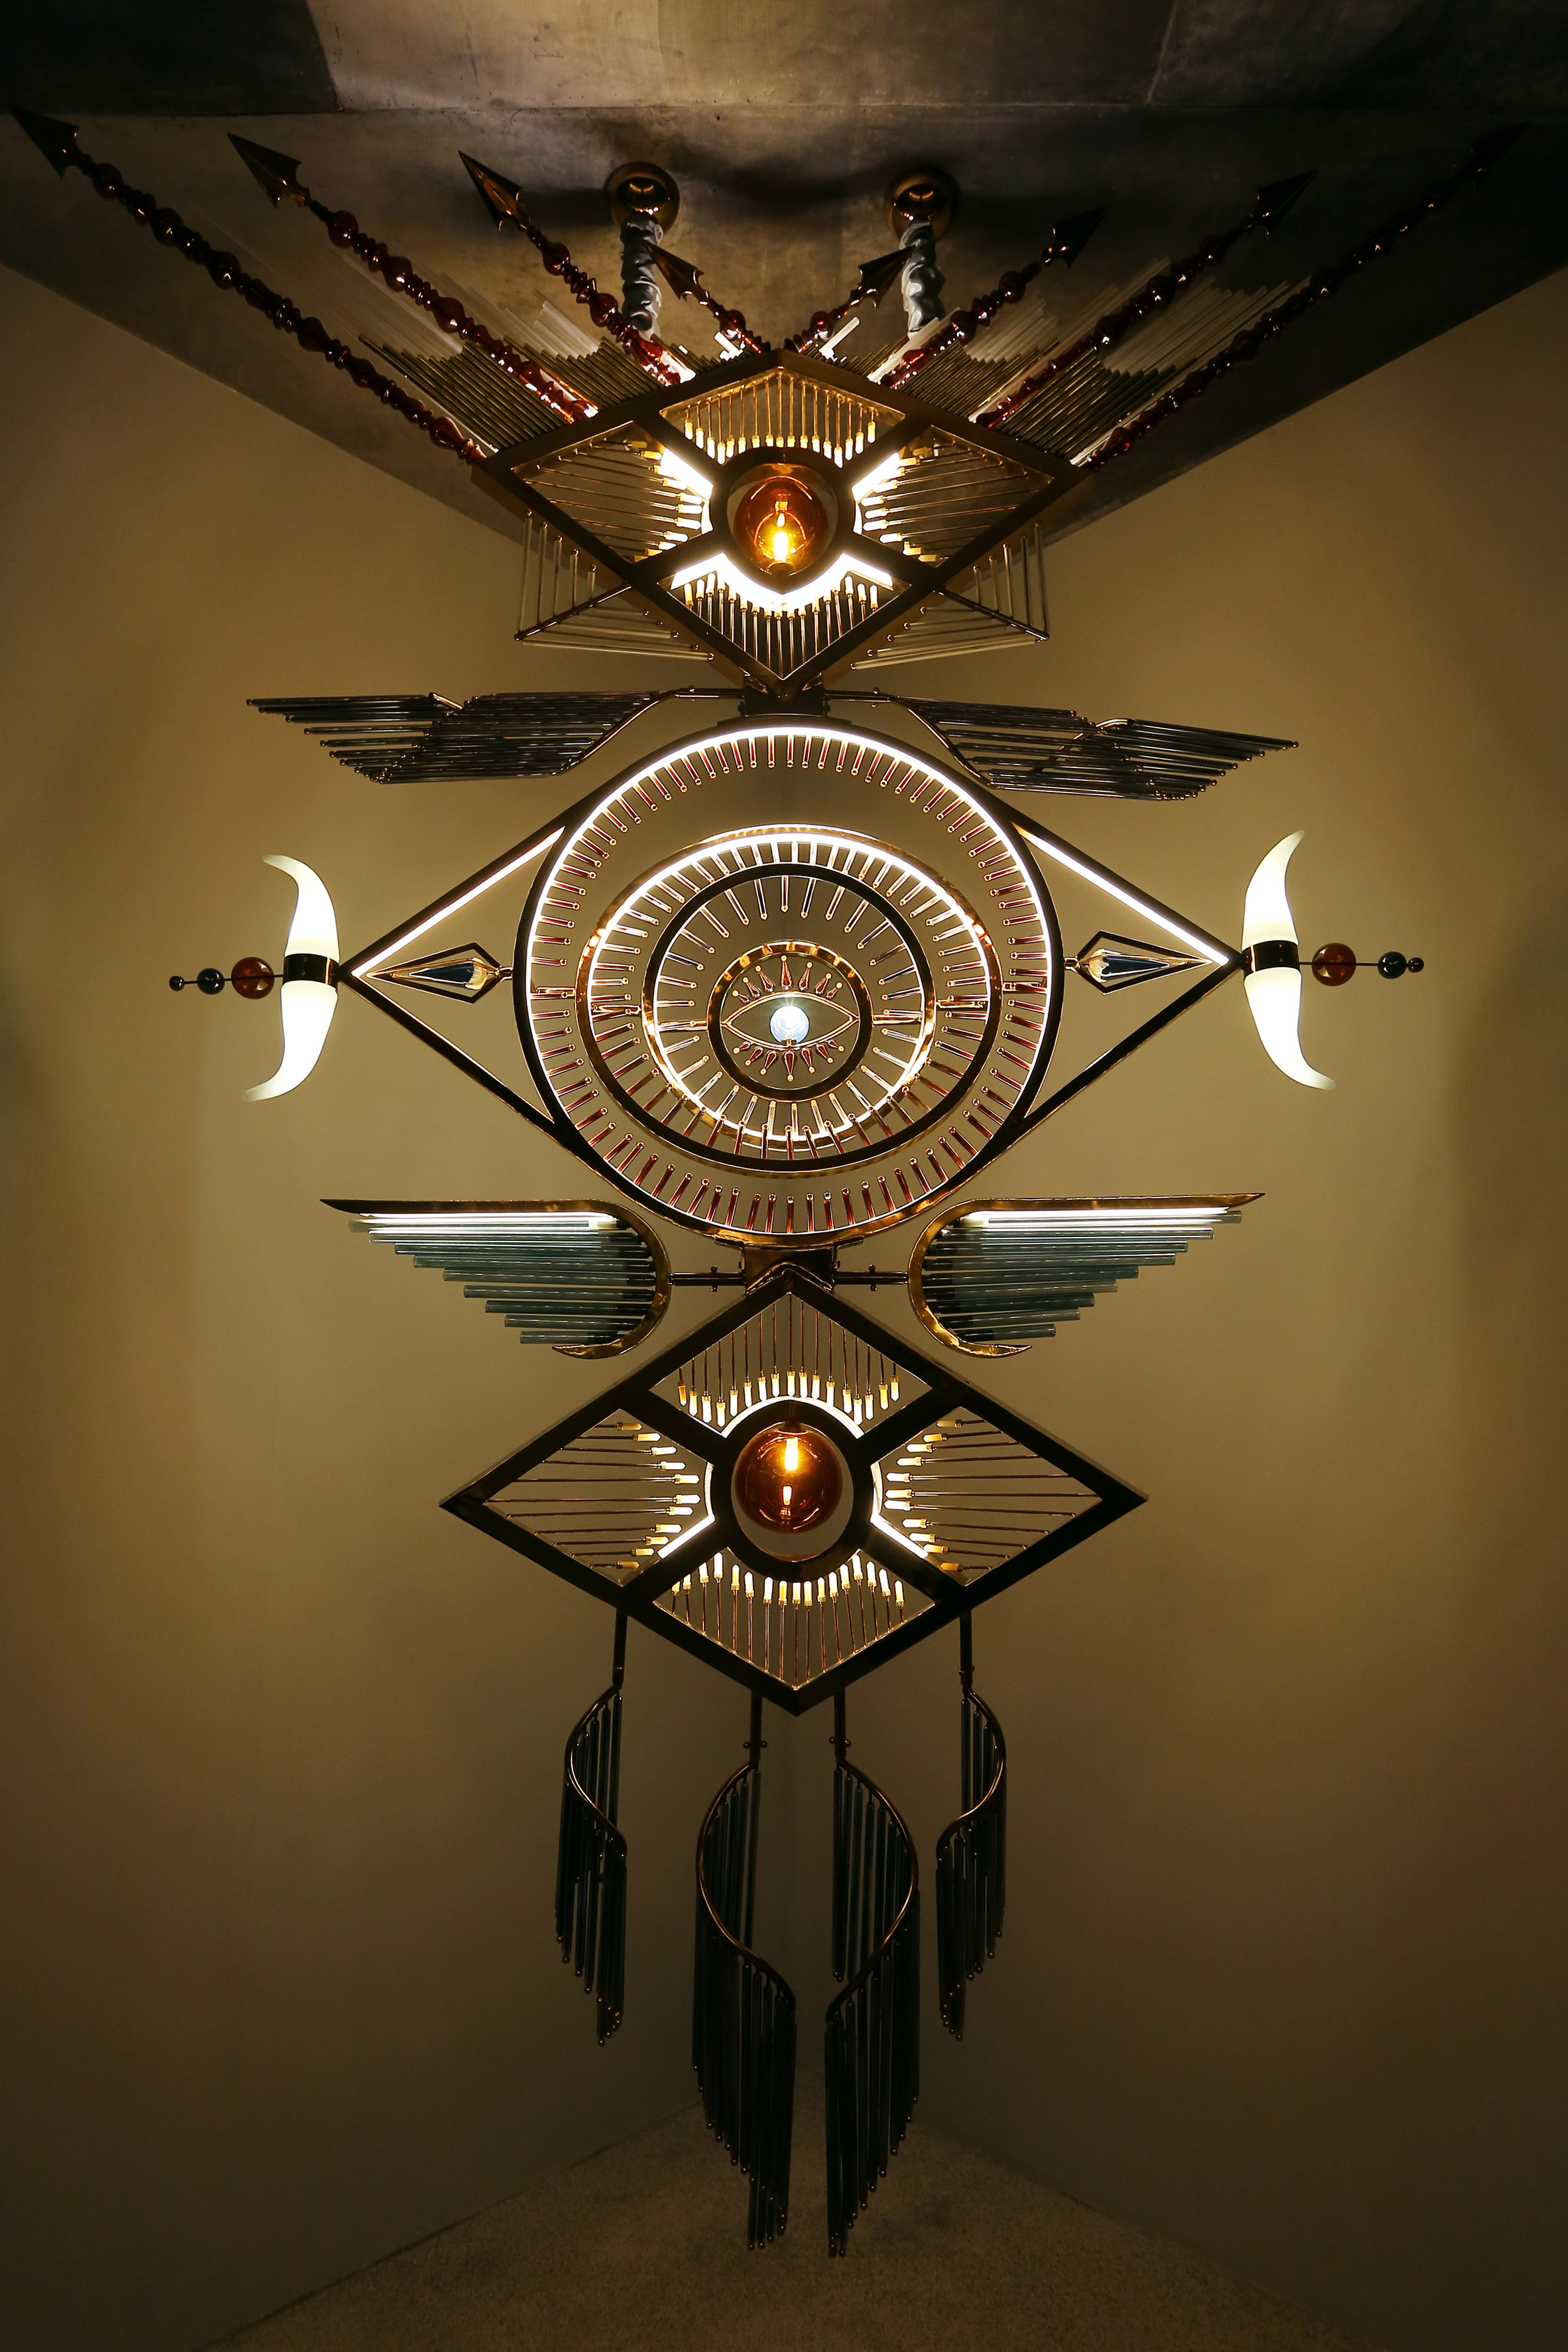 Klove's Totems Over Time lights take the form of Art Deco-style talismans